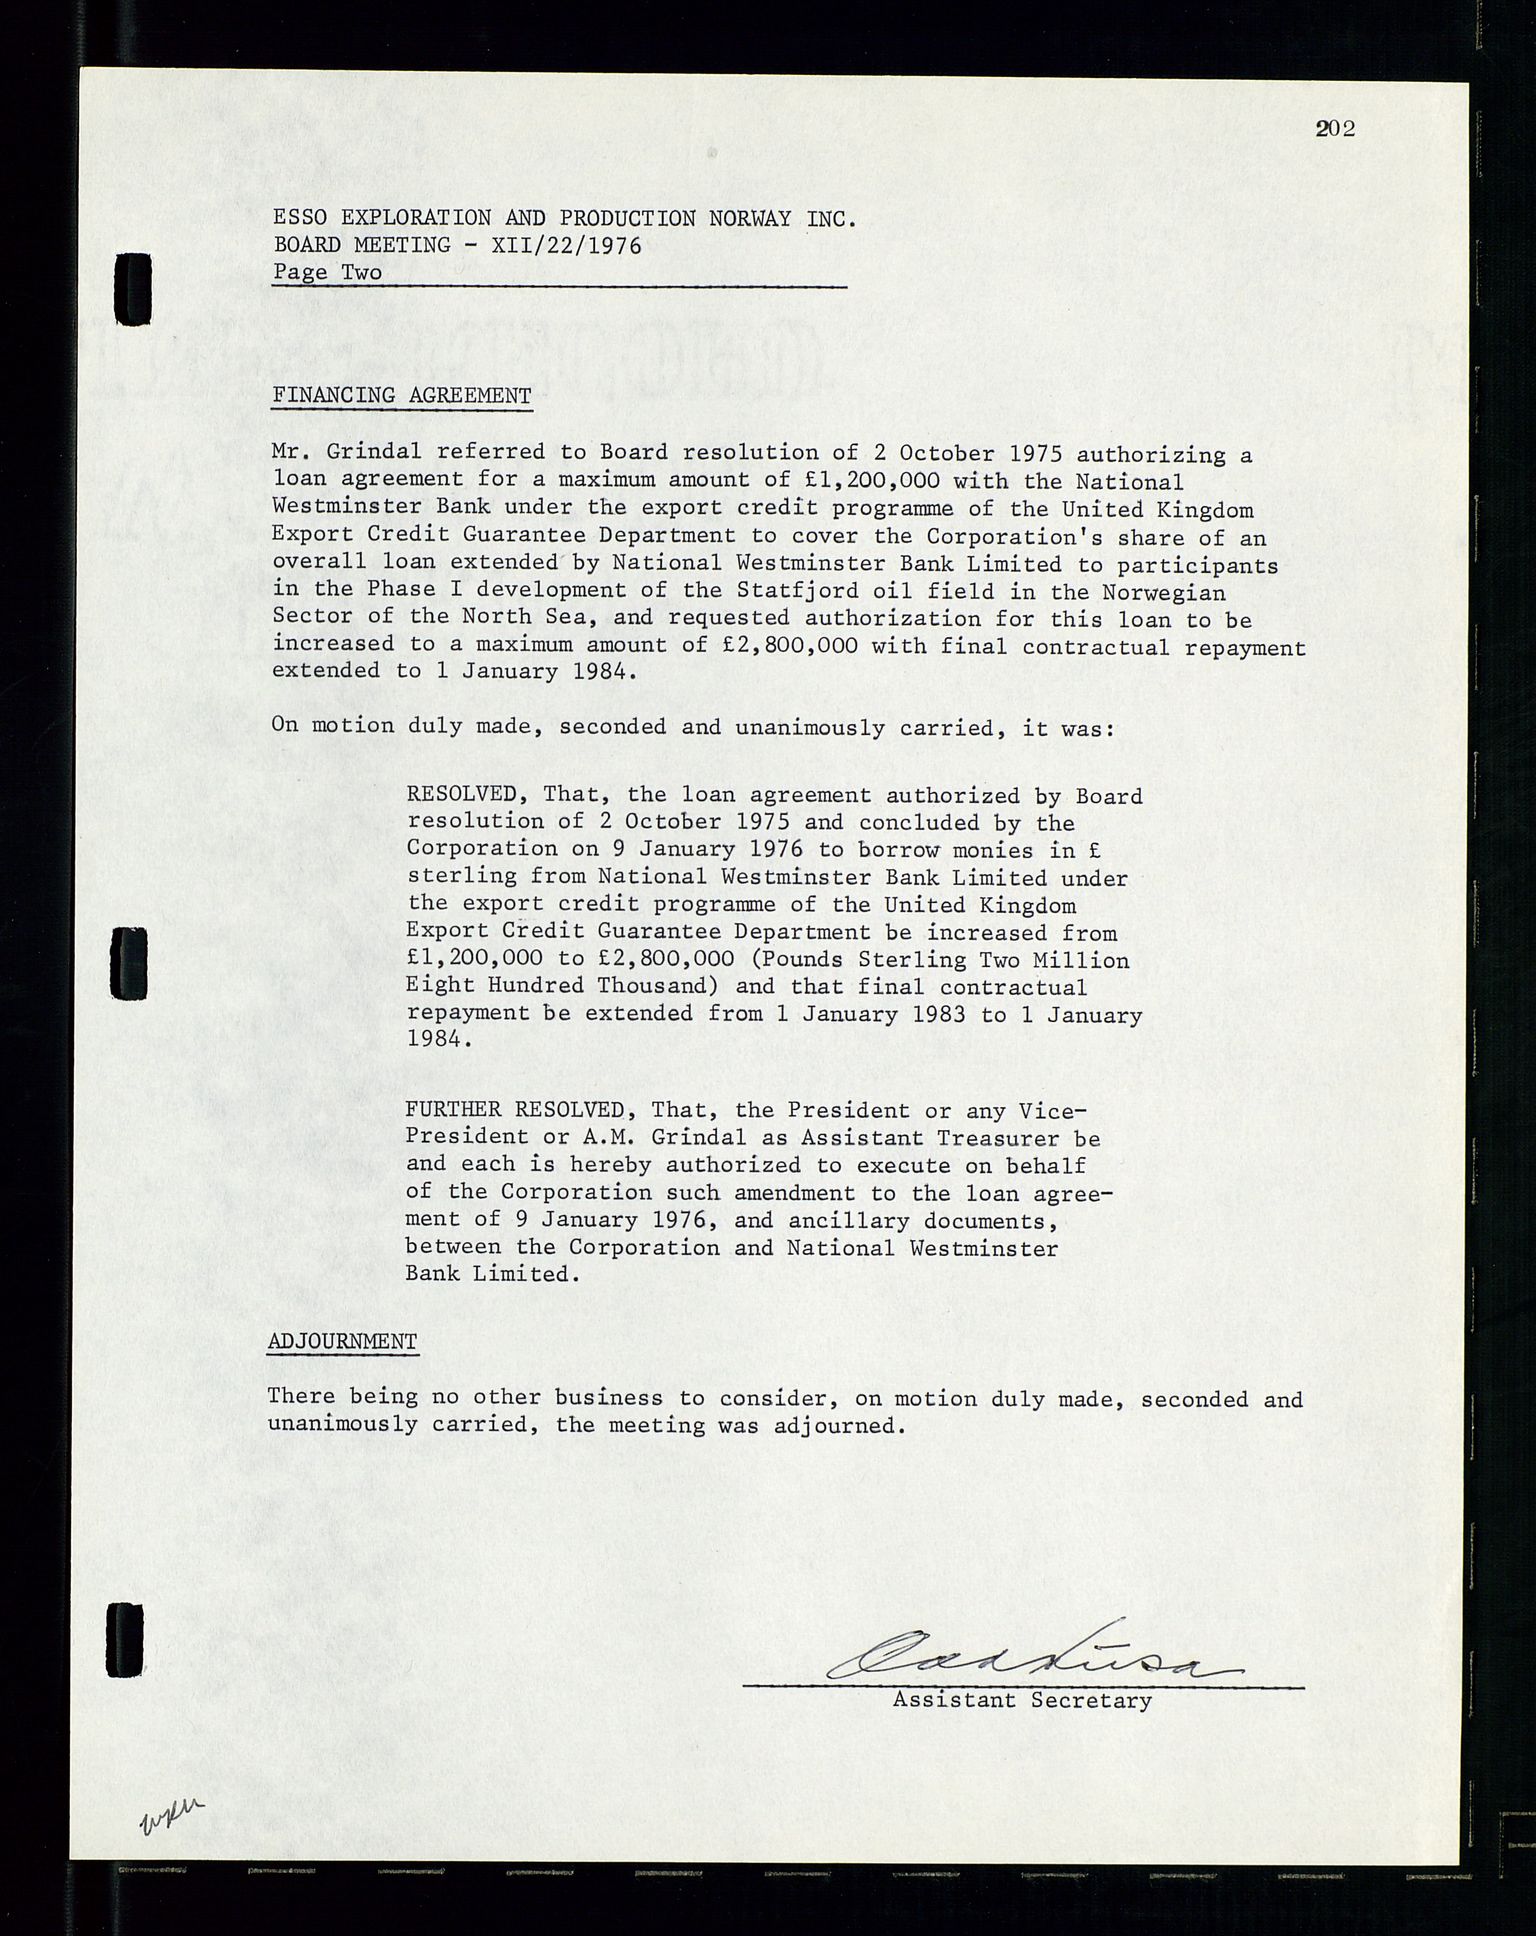 Pa 1512 - Esso Exploration and Production Norway Inc., SAST/A-101917/A/Aa/L0001/0002: Styredokumenter / Corporate records, Board meeting minutes, Agreements, Stocholder meetings, 1975-1979, s. 53